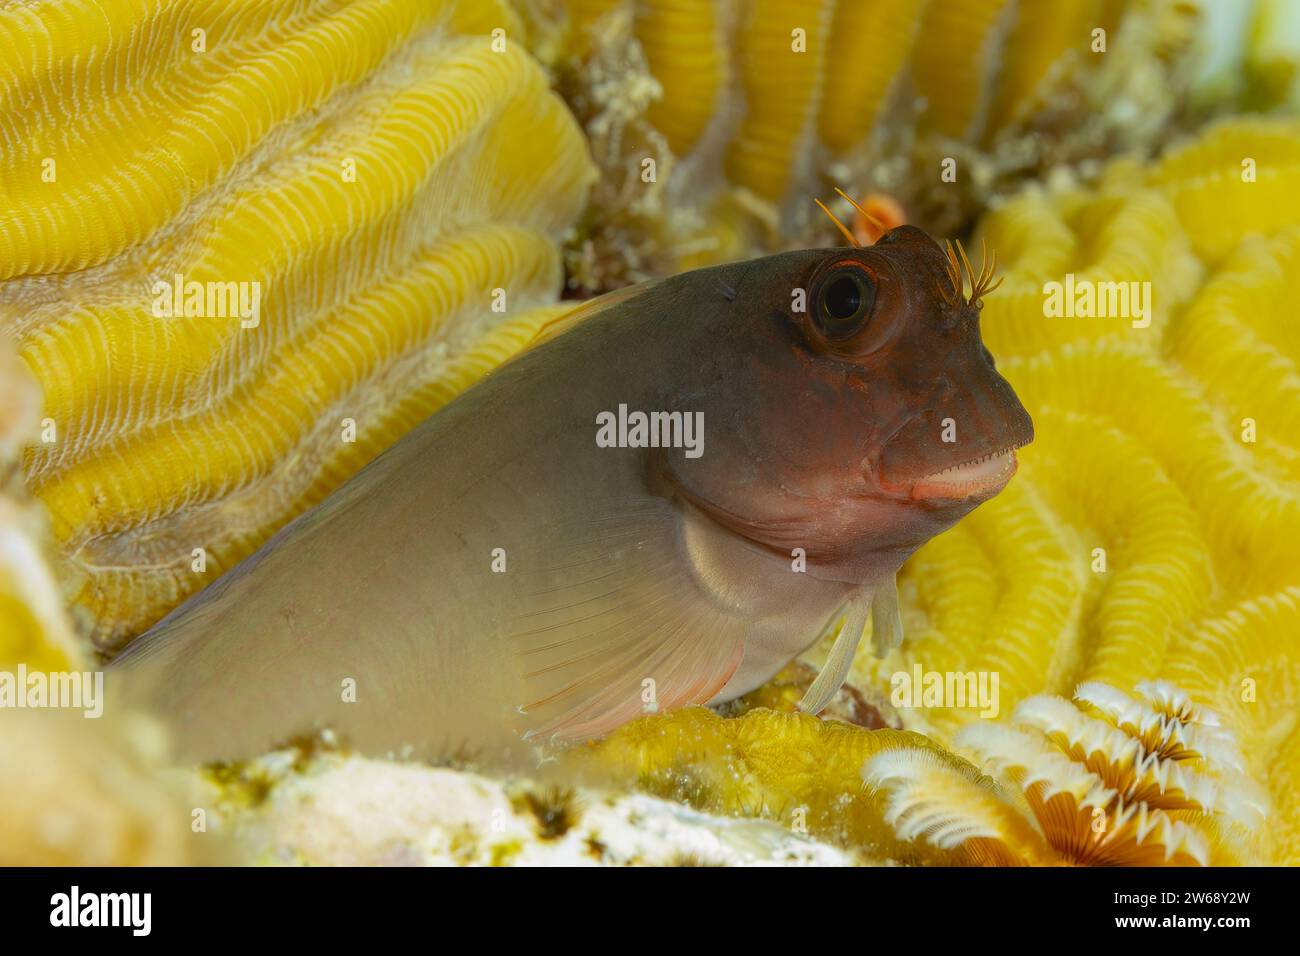 Photo of a blacktip grouper nestled in the folds of a bright yellow coral, showcasing ocean wildlife. Stock Photo